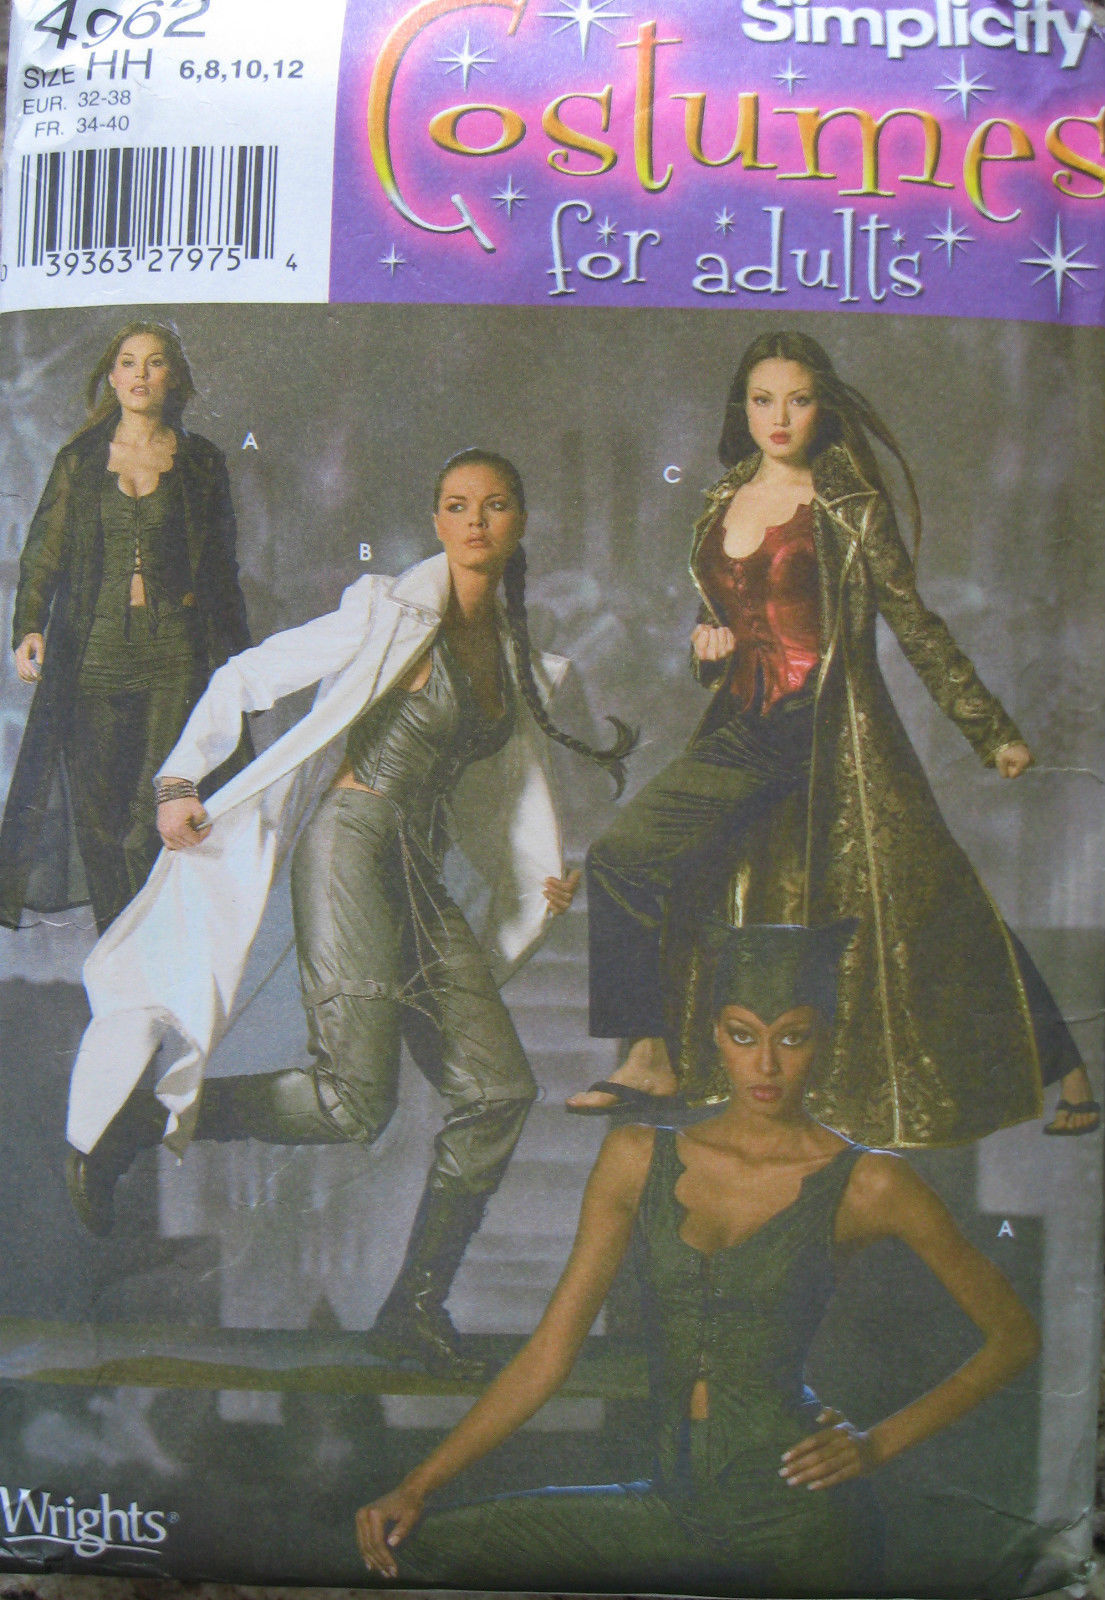 Primary image for Simplicity 4962 CATWOMAN SORCERESS COSTUMES 6-8-10-12 